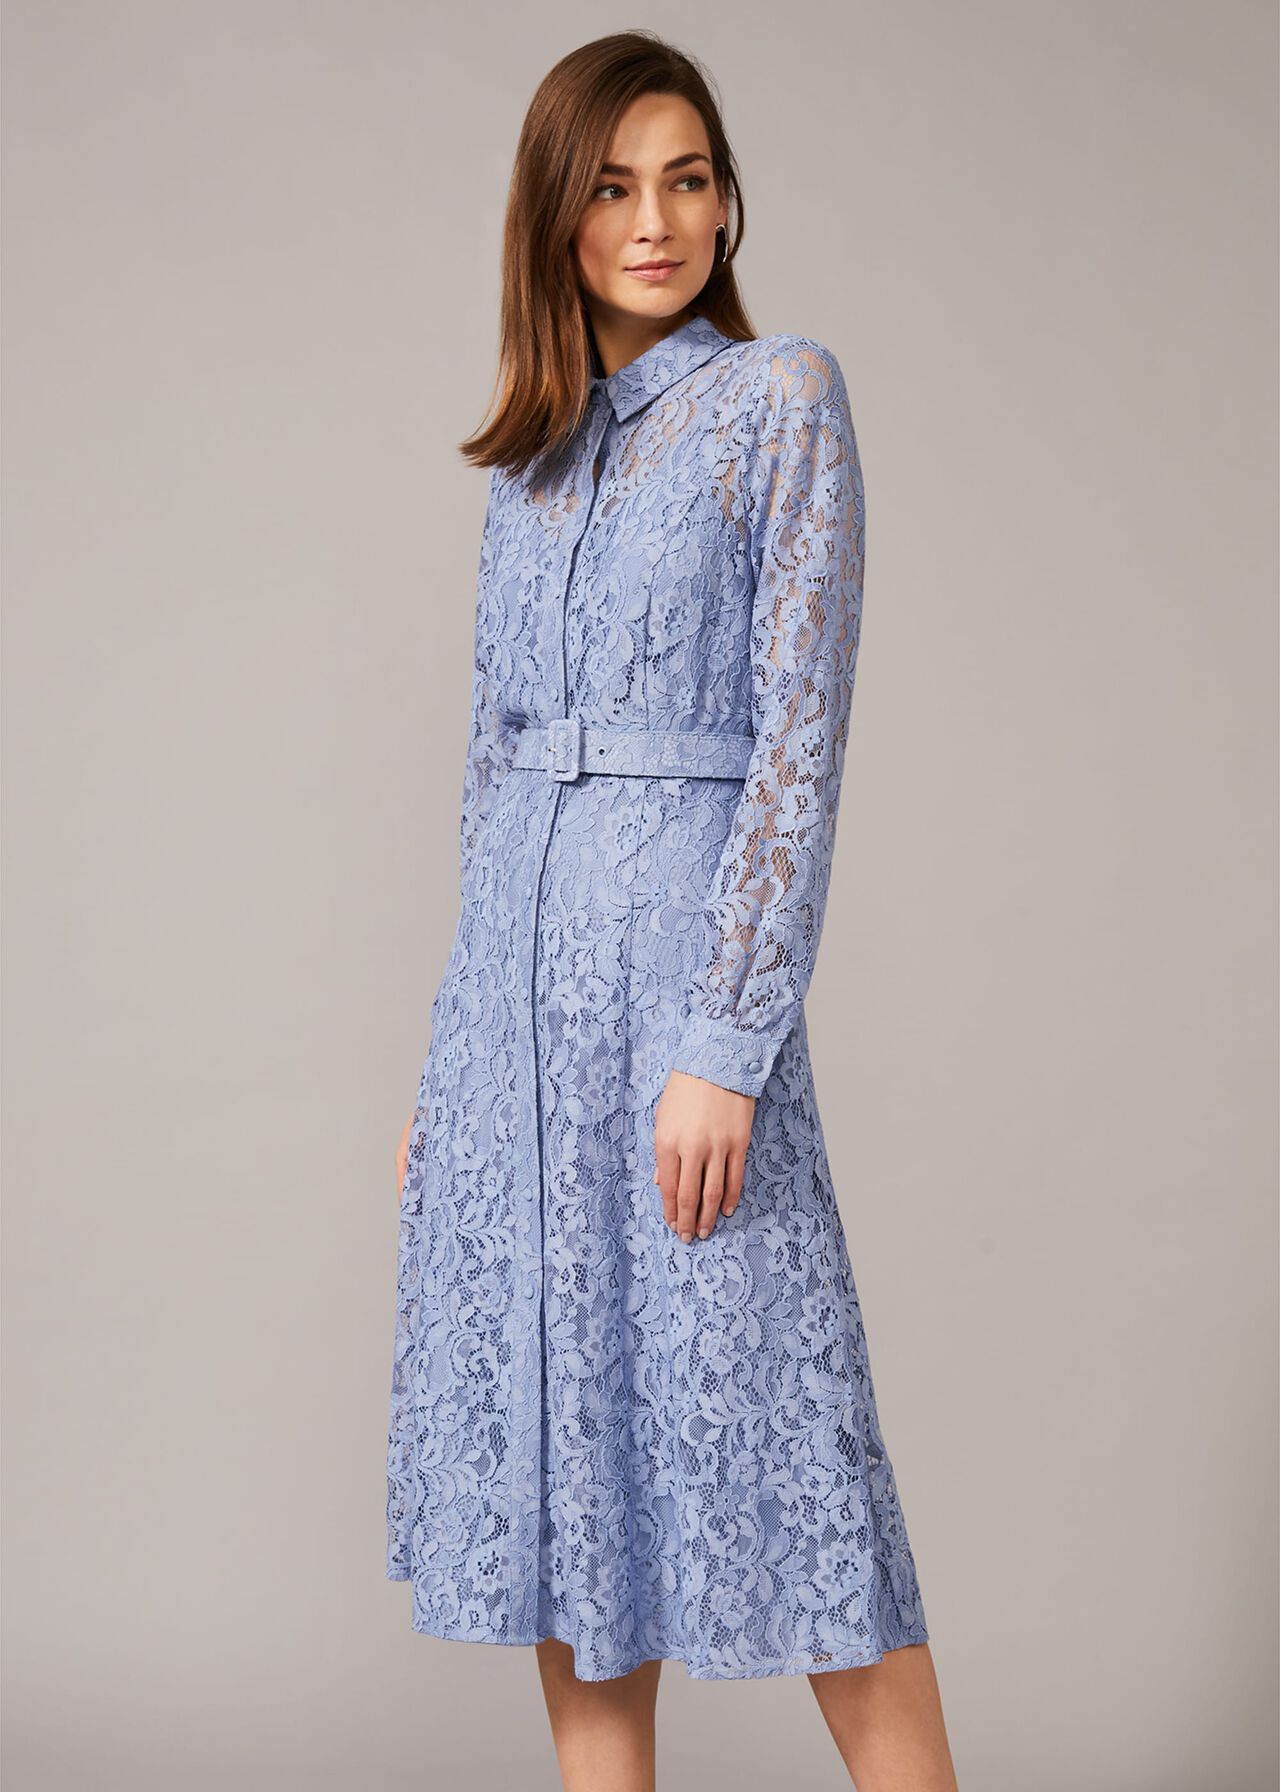 Autumn Lace Belted Dress | Phase Eight